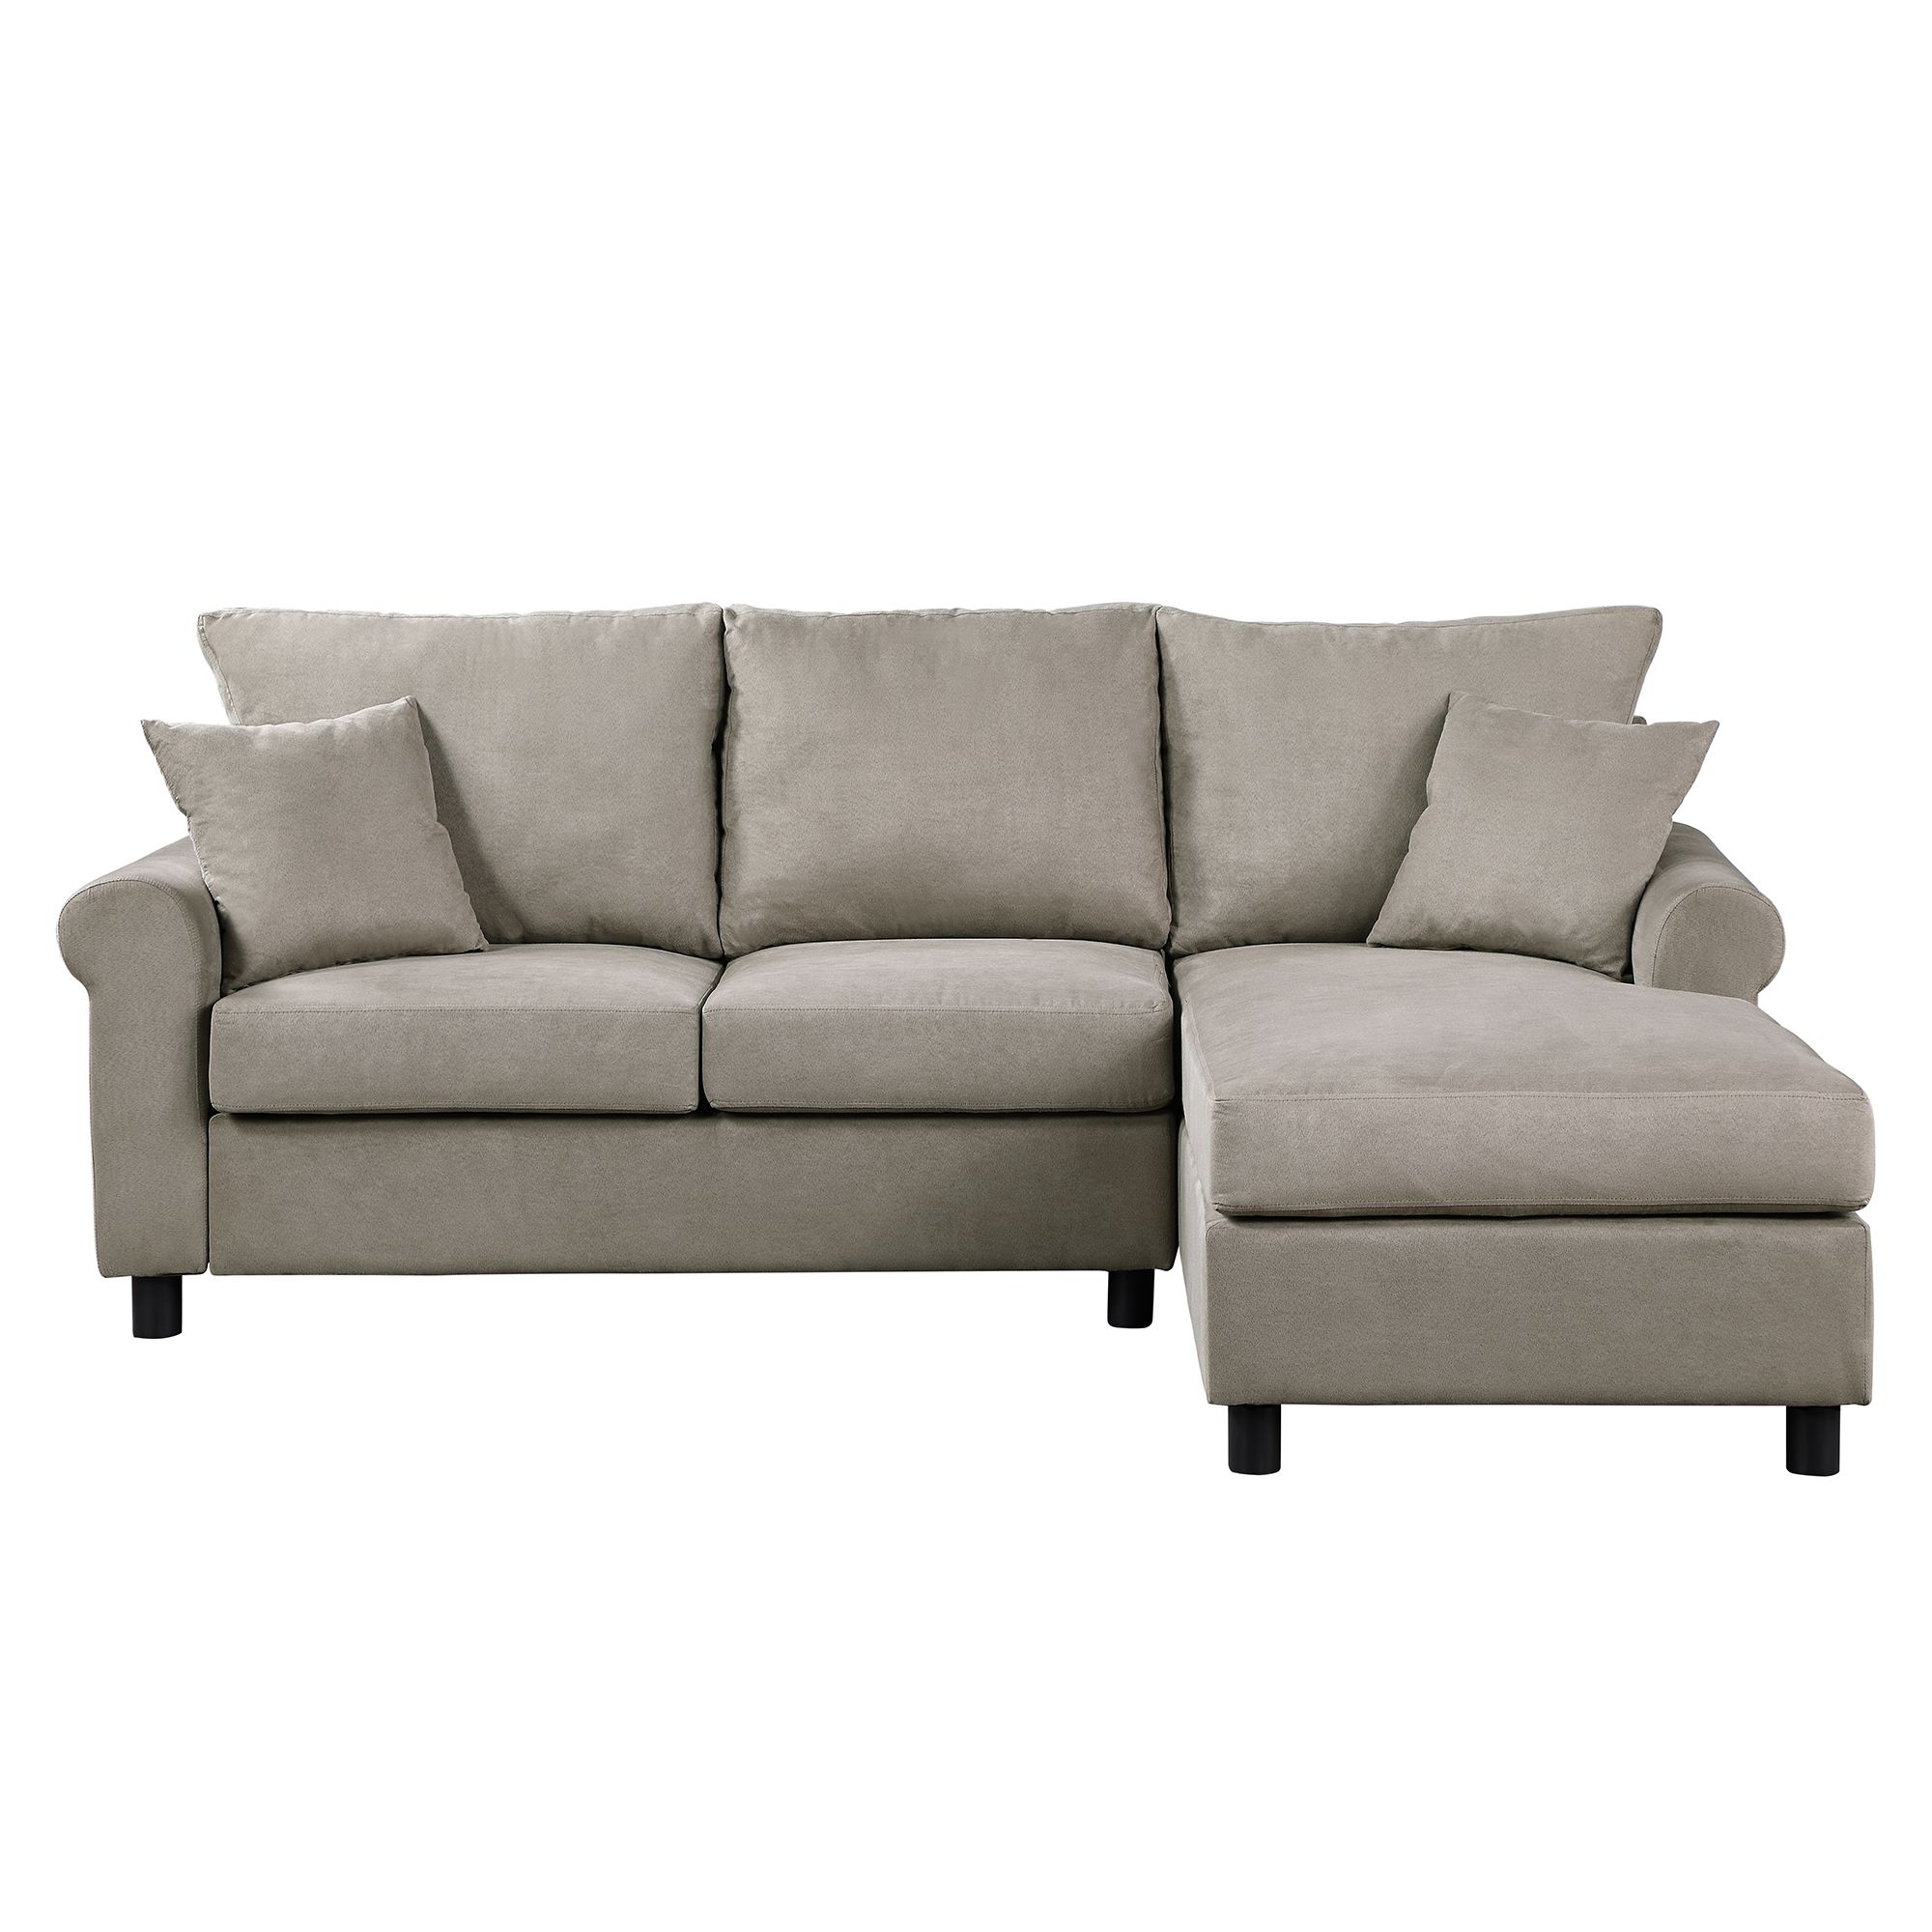 Well Known Clifton Reversible Sectional Sofas With Pillows Pertaining To Sectional Sofa, Segmart 35'' X 85'' X 61'' Tufted (View 3 of 25)